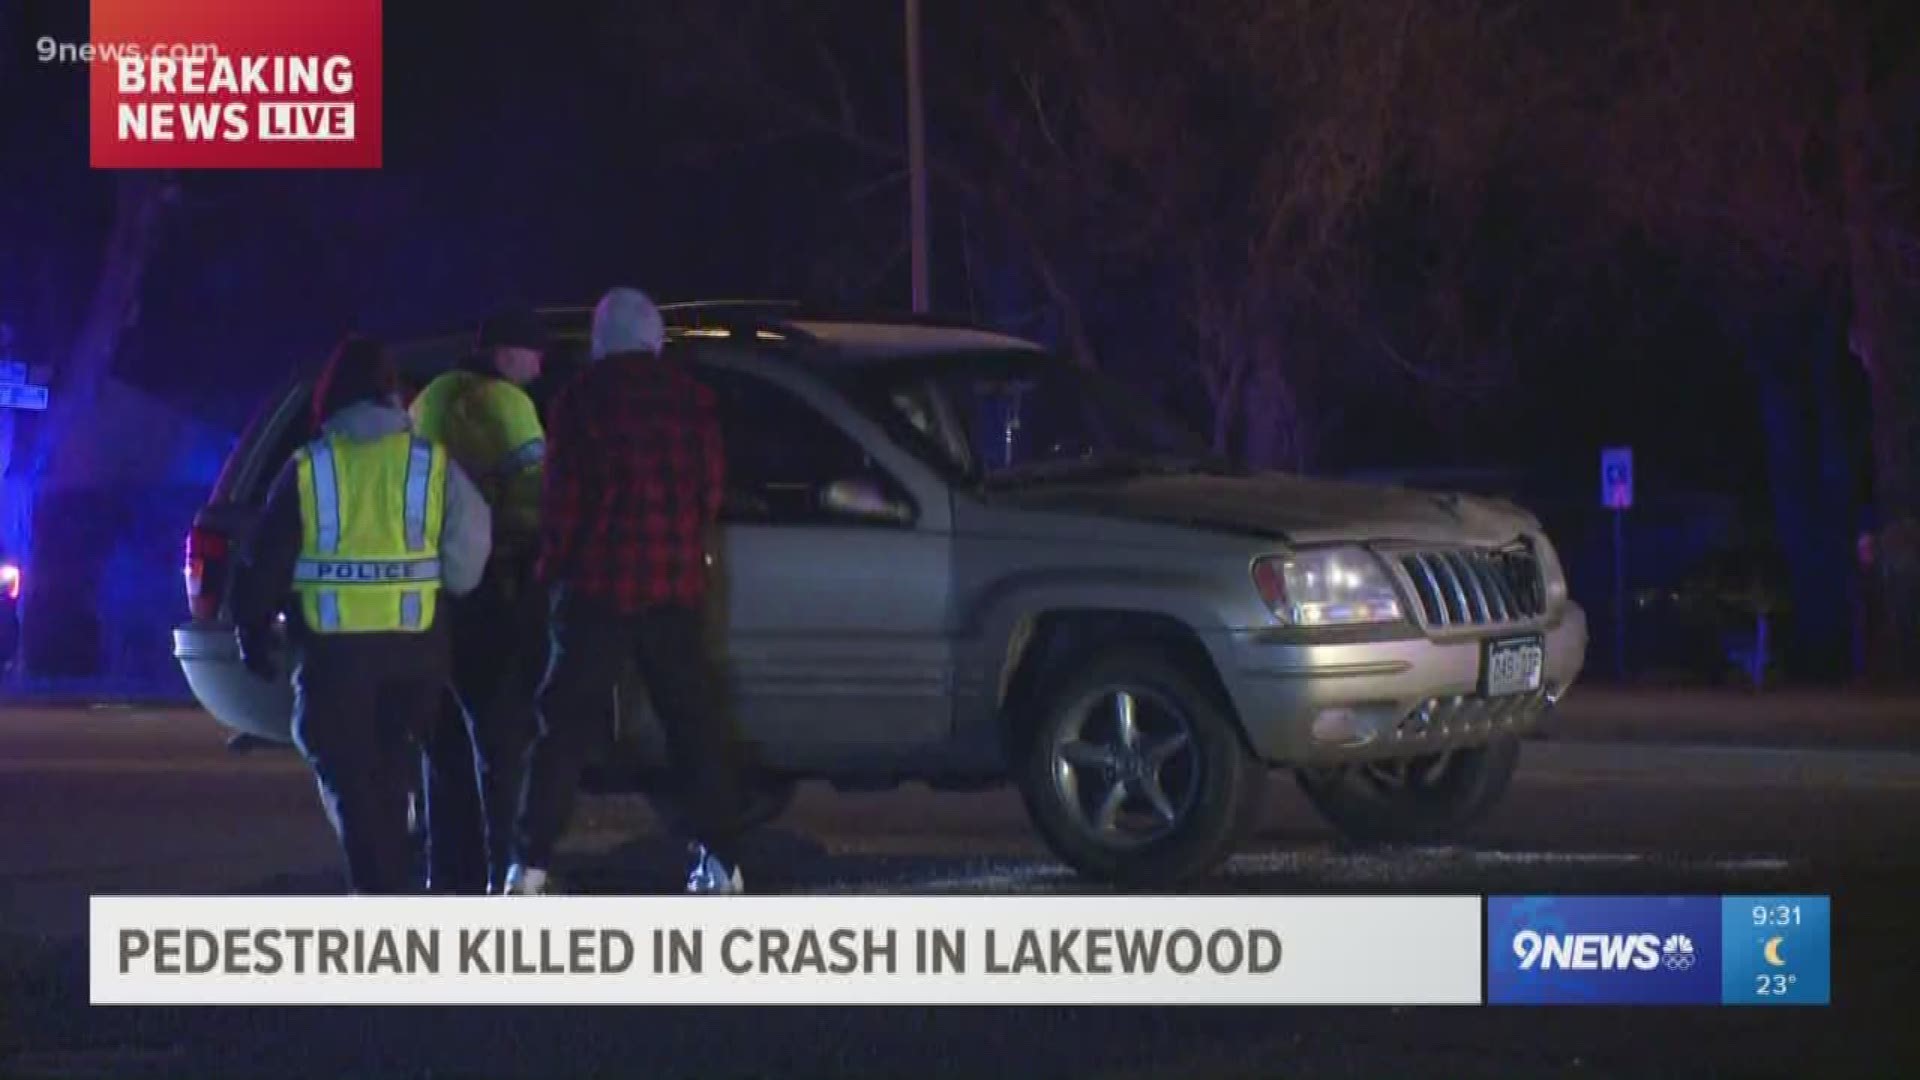 The crash scene was near Wadsworth and West 23rd in Lakewood. The driver stayed on the scene and is cooperating.